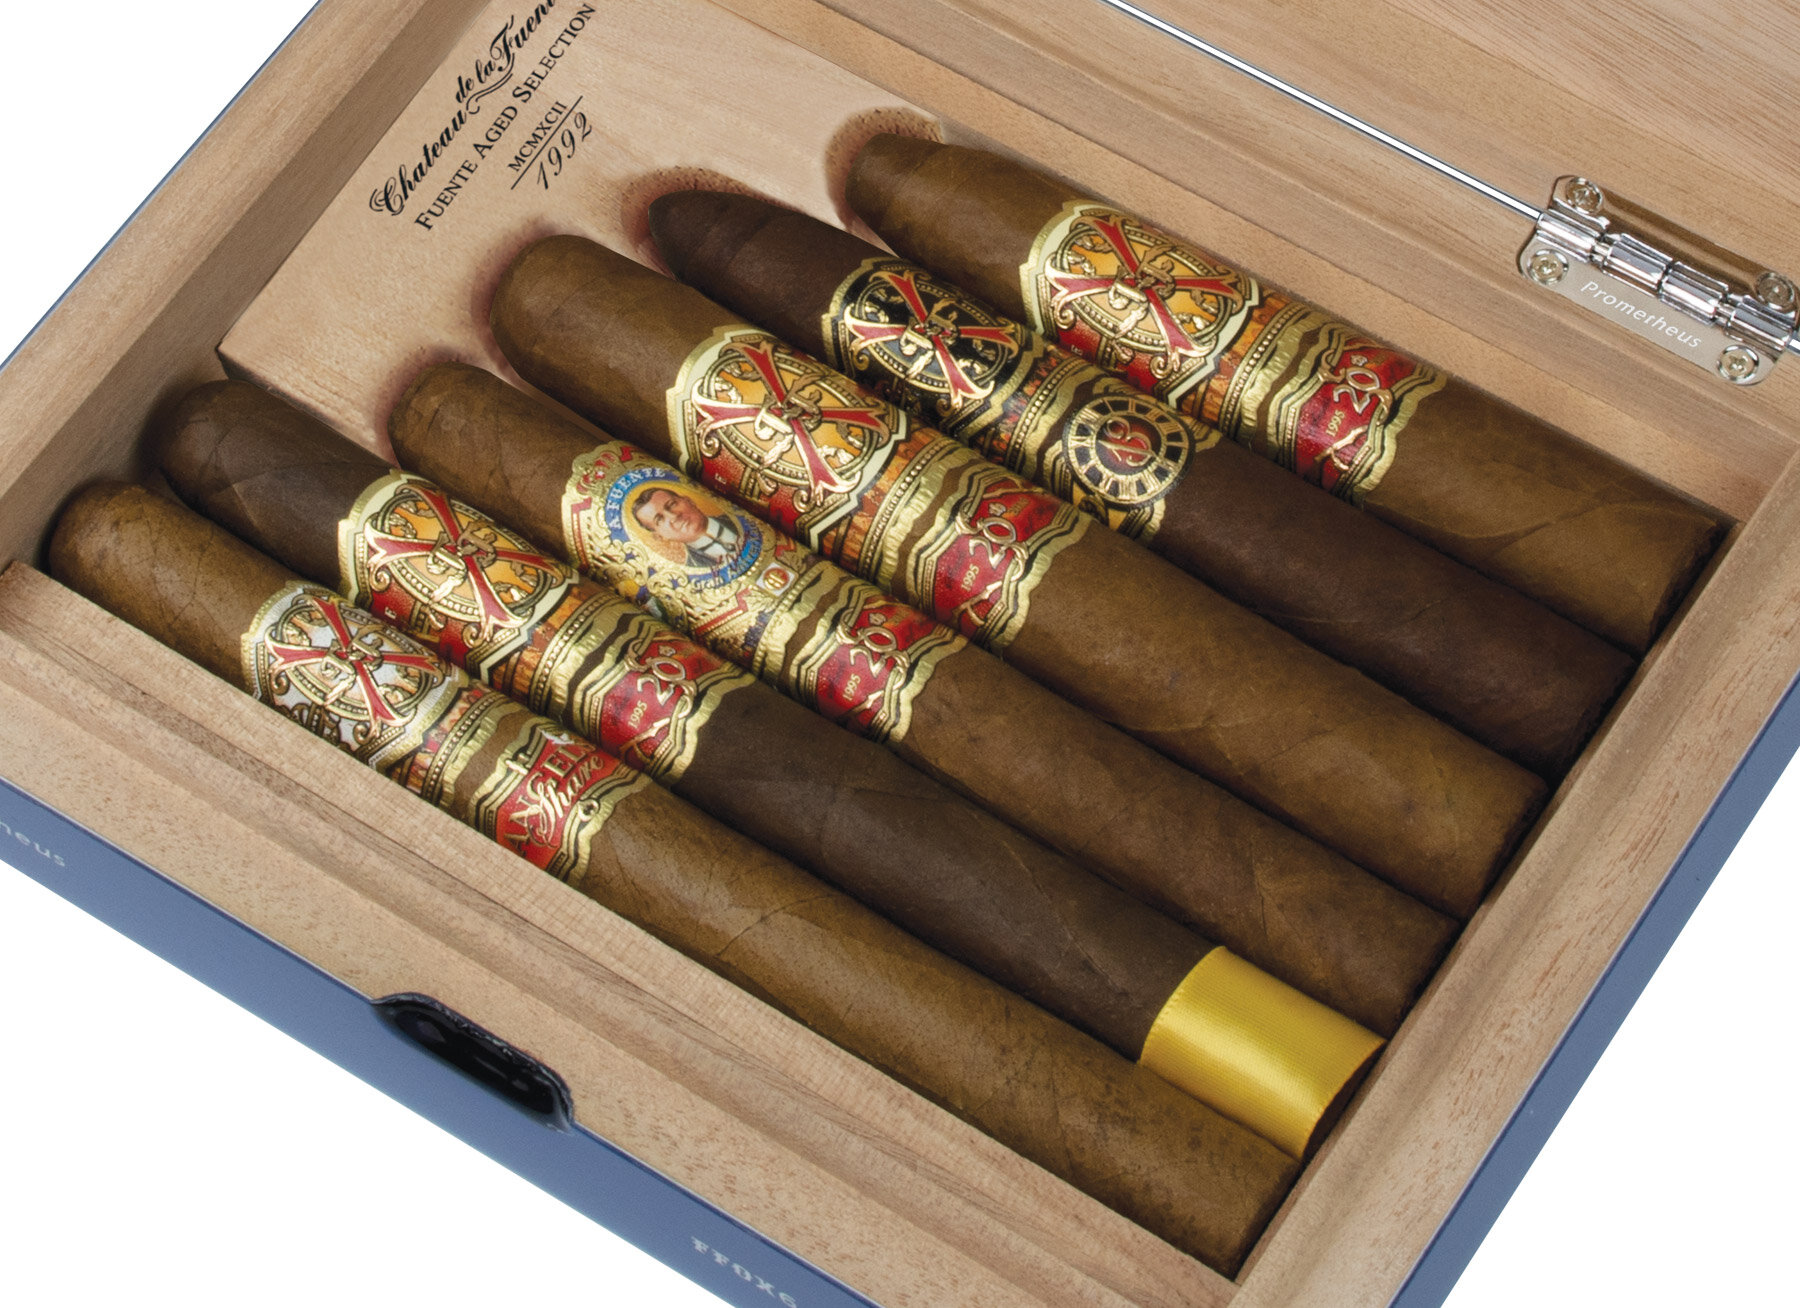 Cigars for Blue, Red, Yellow Travel Humidors